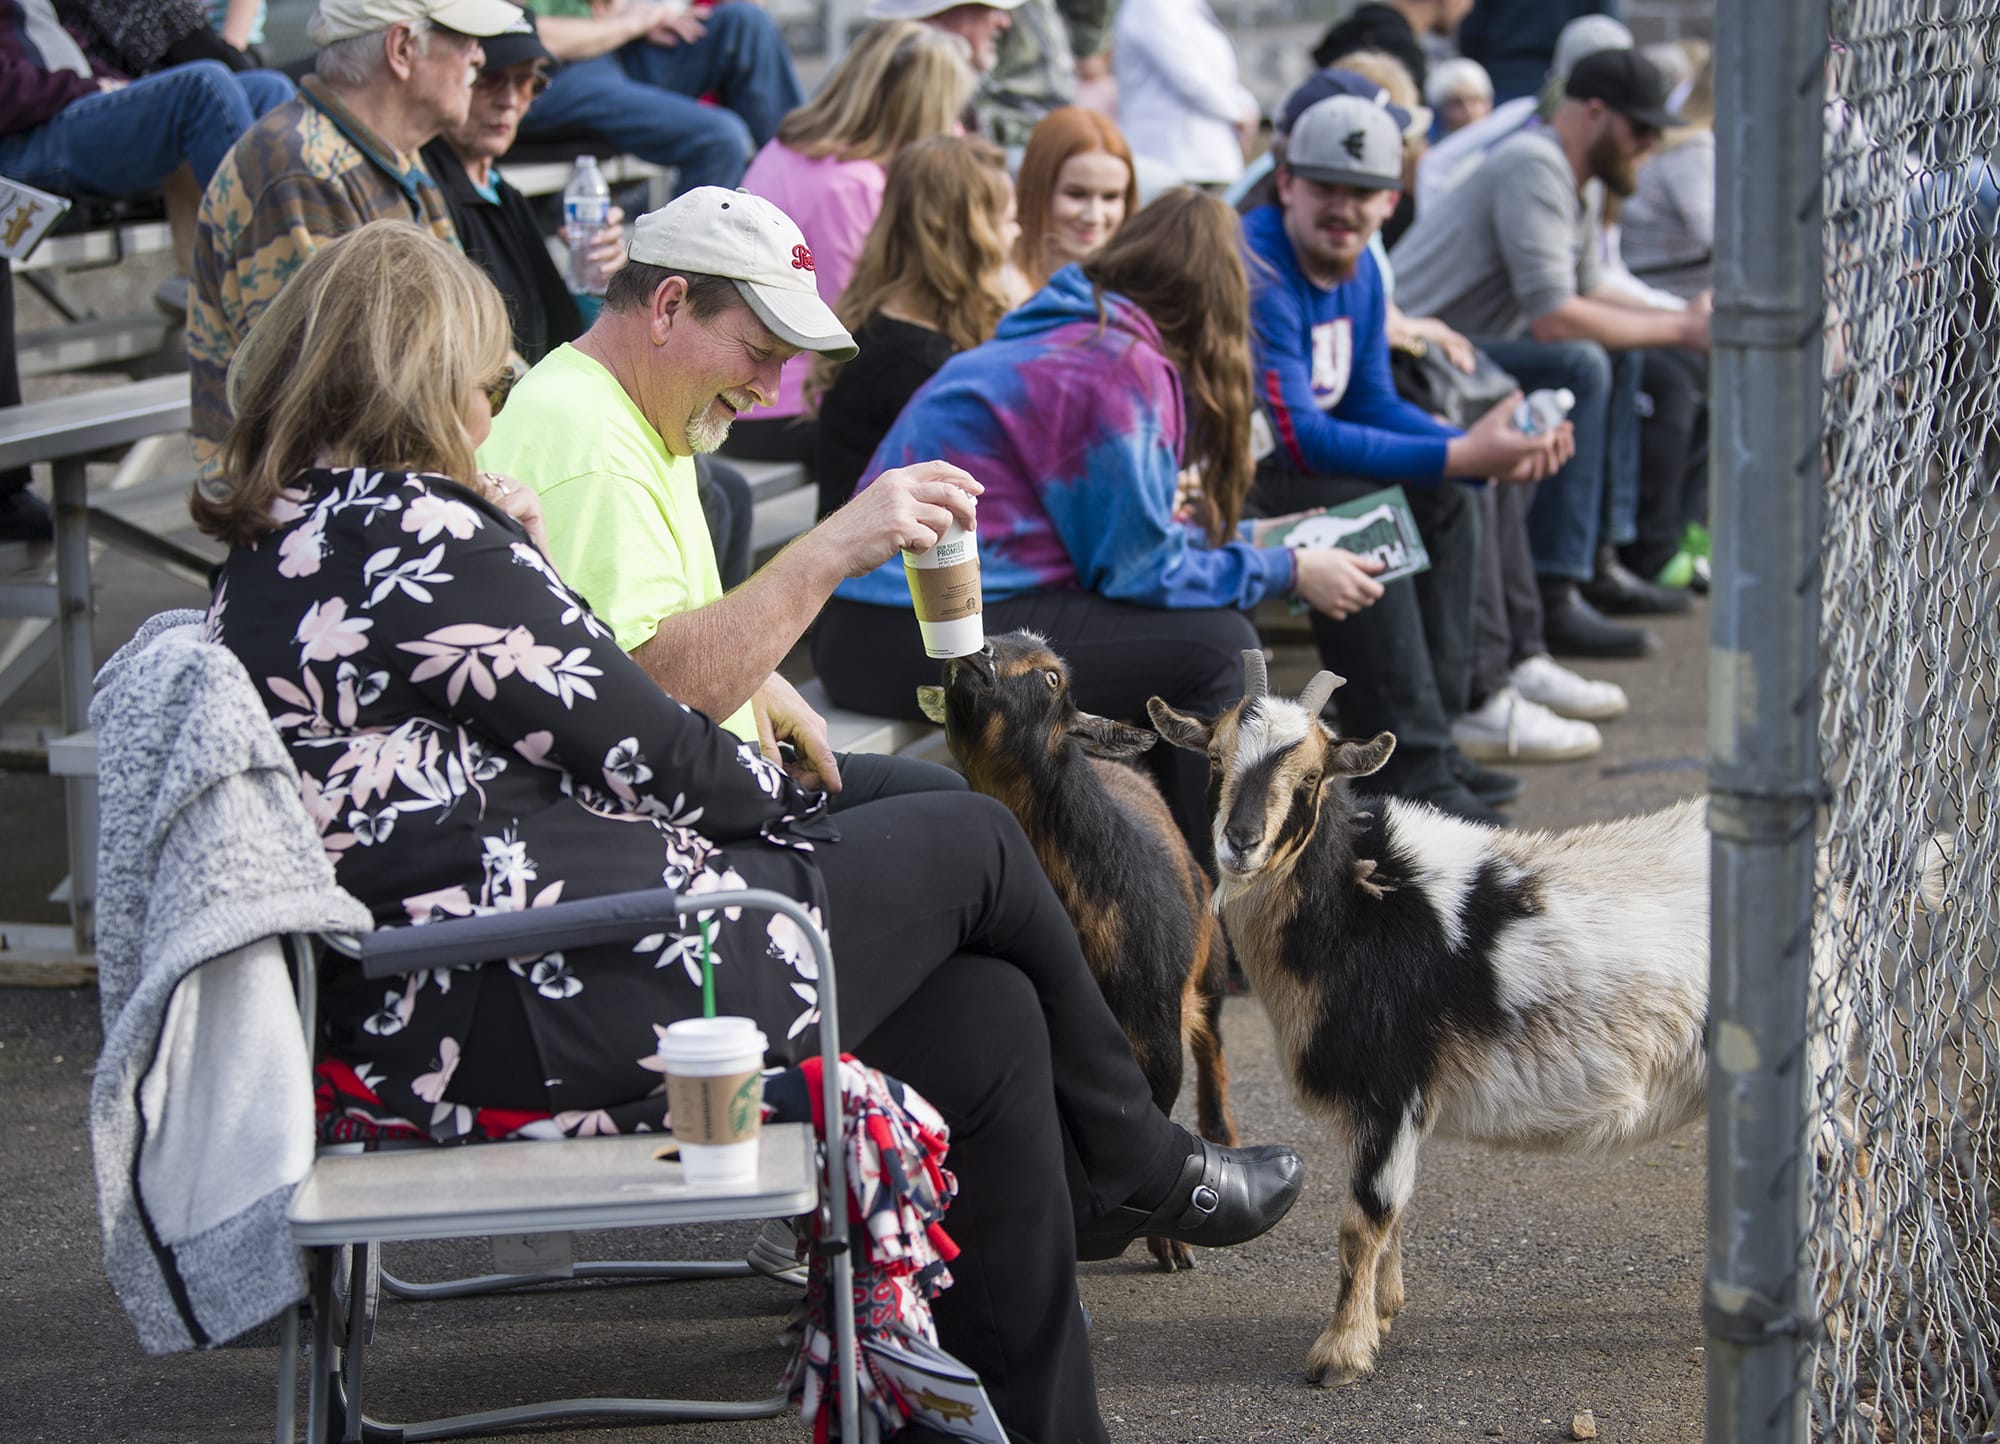 Kathy Birchem, left, watches as Nick Birchem saves his beverage from a curious goat at the Evergreen vs. Mountain View baseball game at Evergreen High School’s baseball field on Monday.